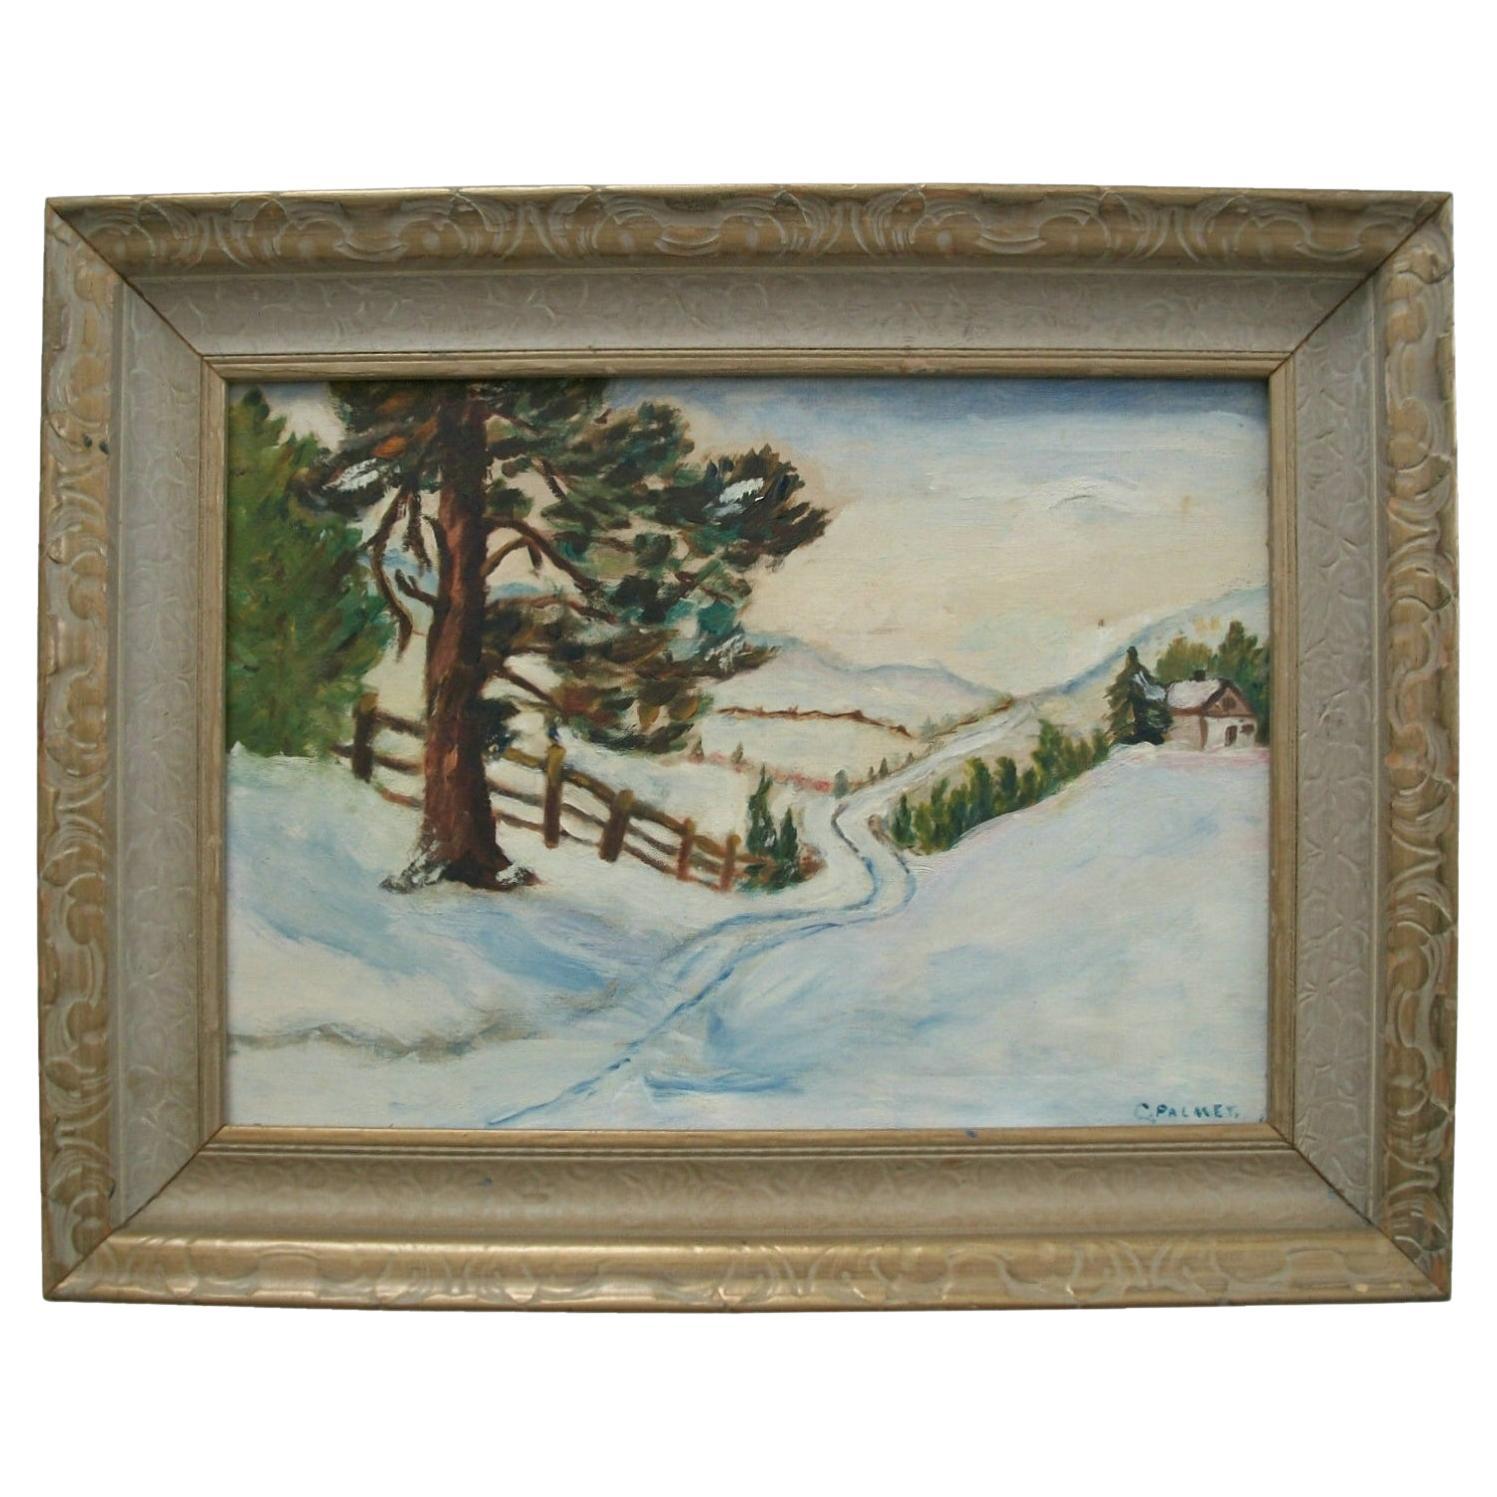 C PALMER - Impressionist Style Winter Landscape Painting - Canada - Early 20th C